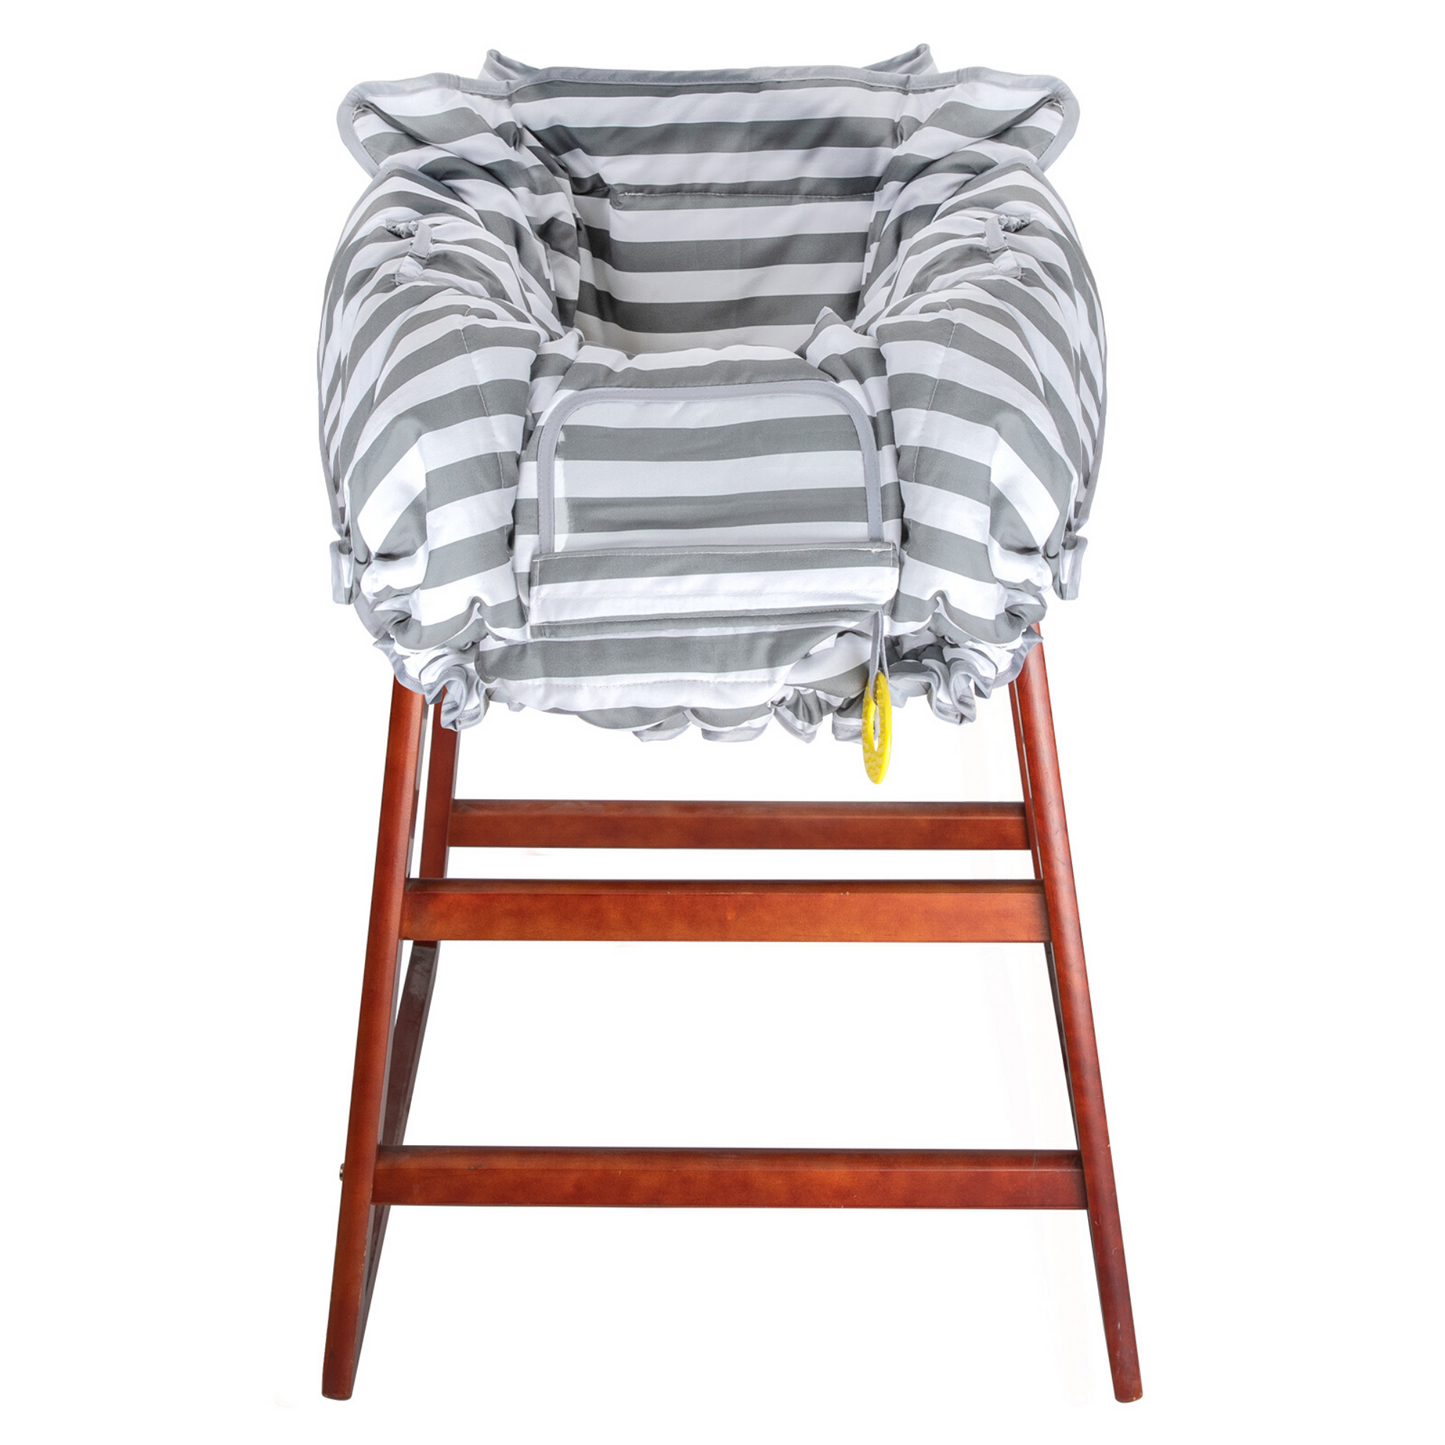 Shopping Cart & Highchair Cover - Gray and White Stripe